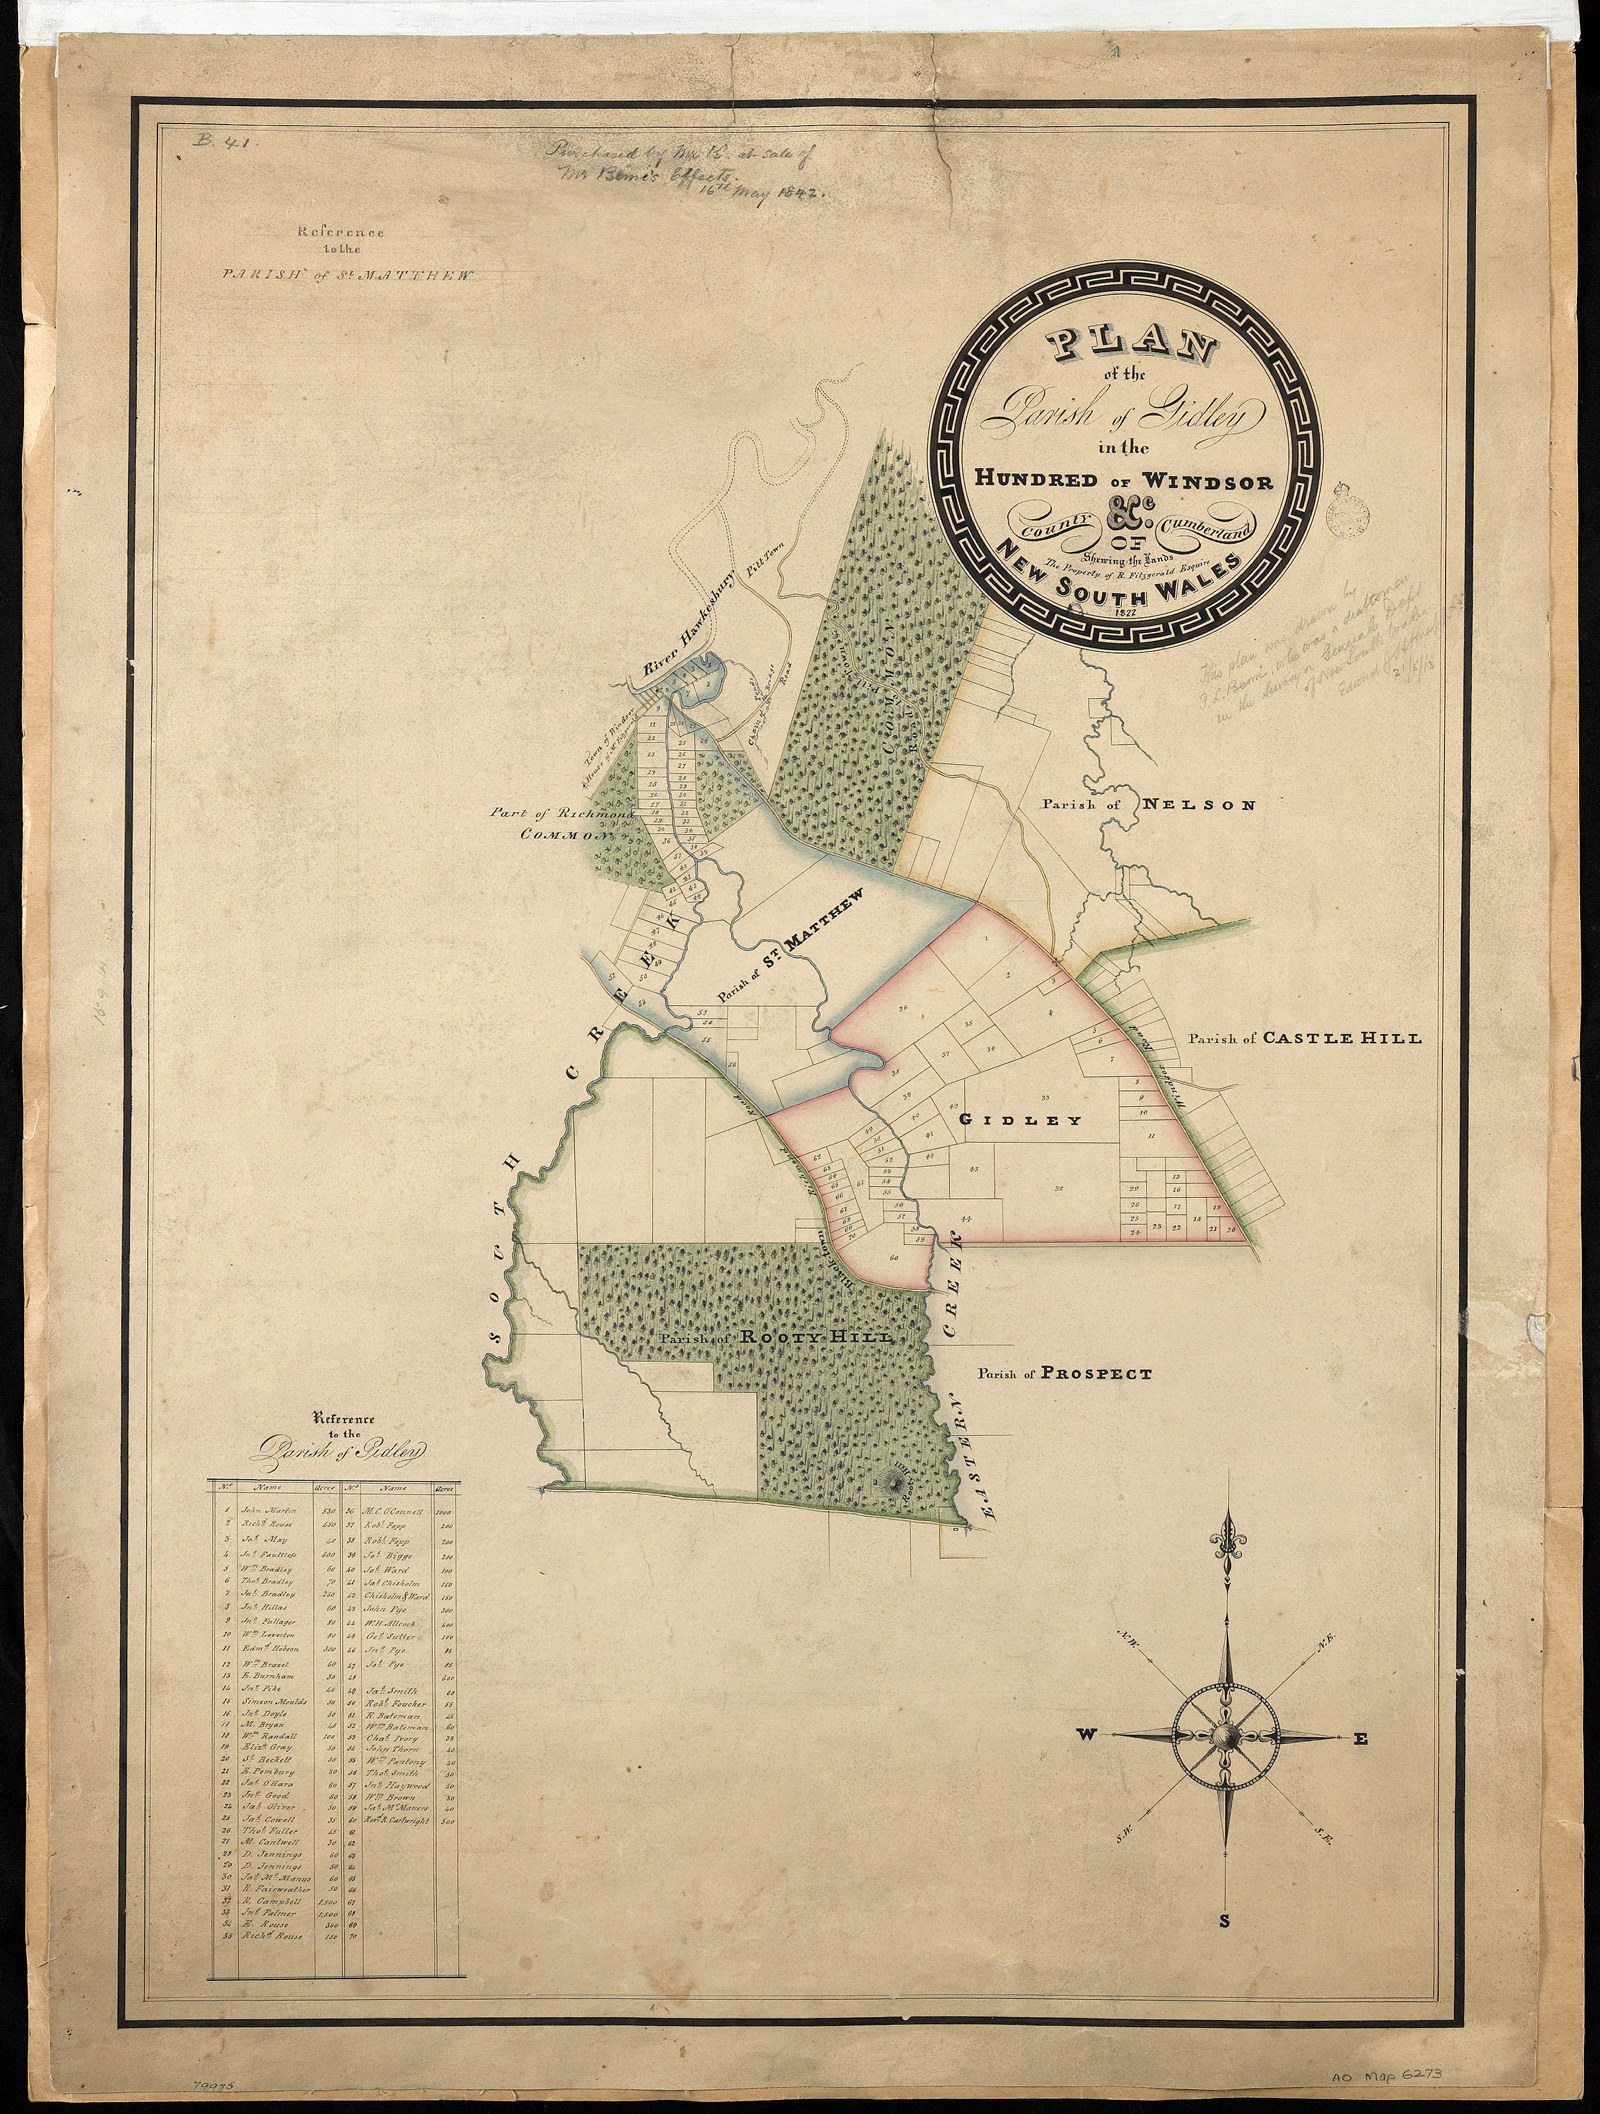 P L Bemi, Plan of the Parish of Gidley in the Hundred of Windsor &c. County of Cumberland Shewing the Lands The Property of R. Fitzgerald Esquire New South Wales 1822